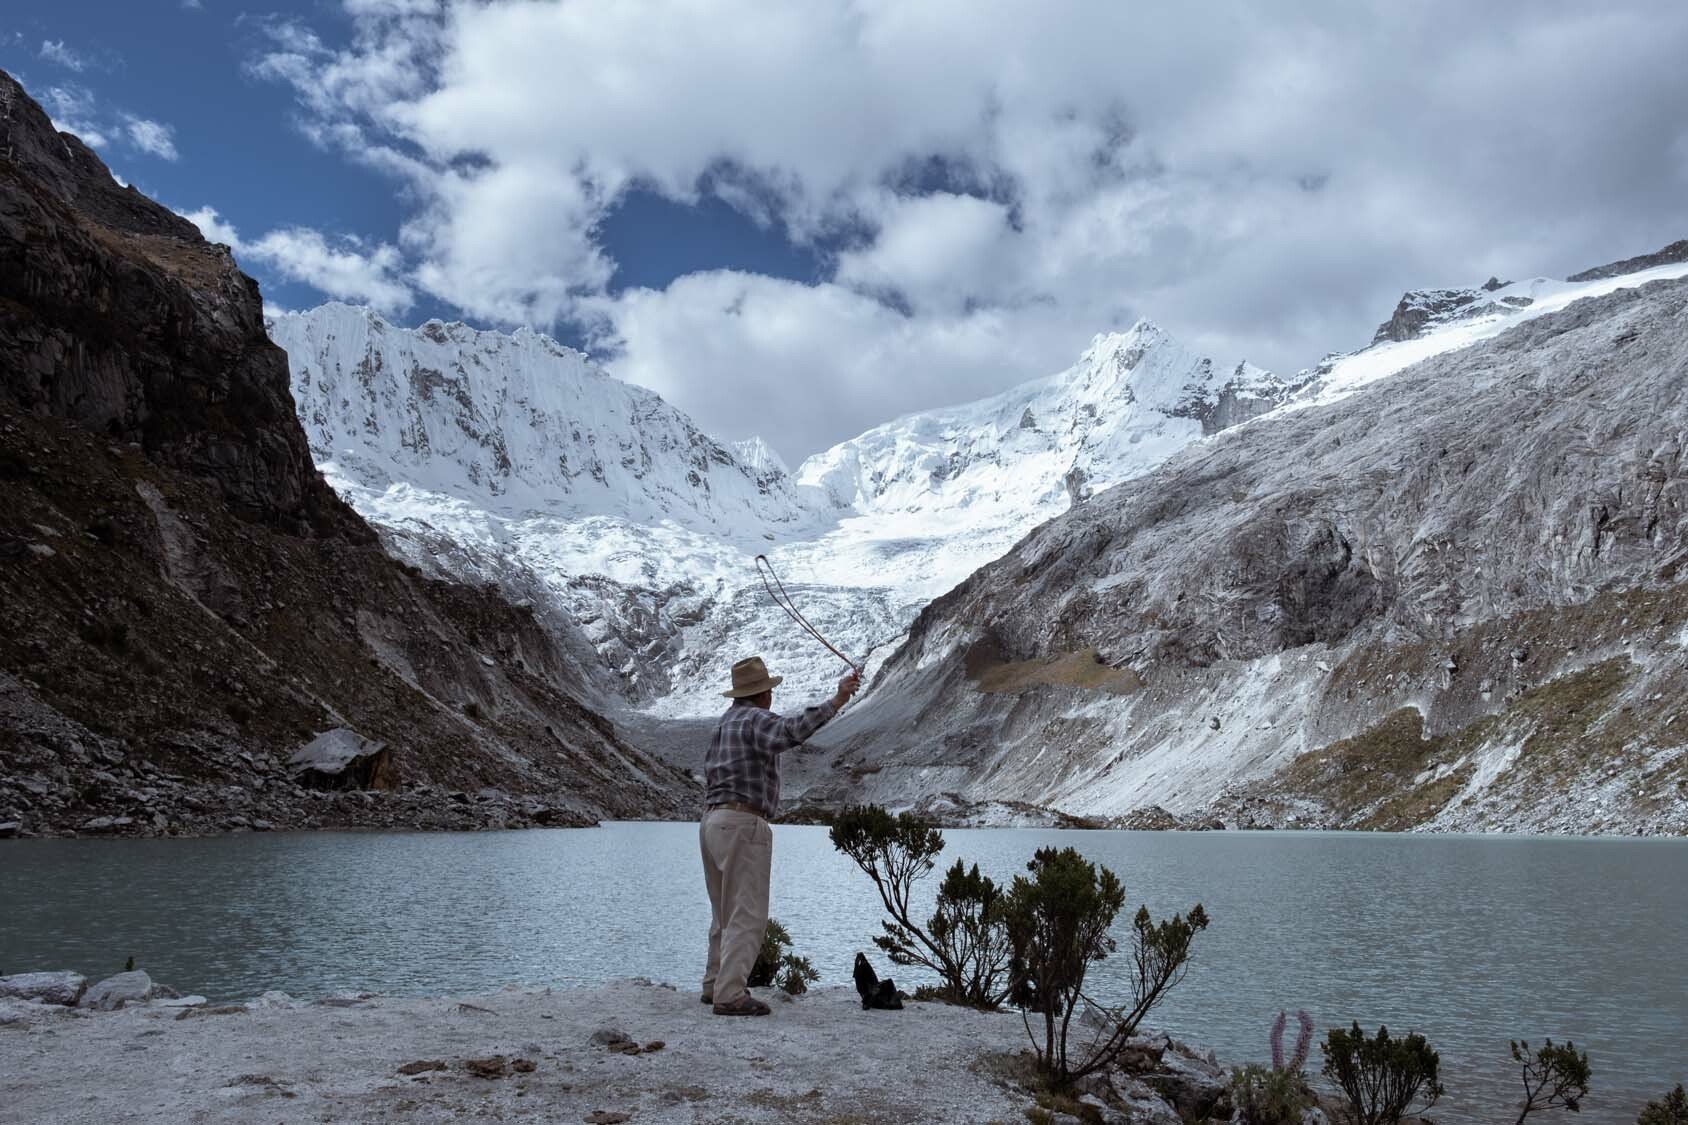 A man stands with back to the camera throwing something out into a lake. The lake is surrounded by snowing mountains.